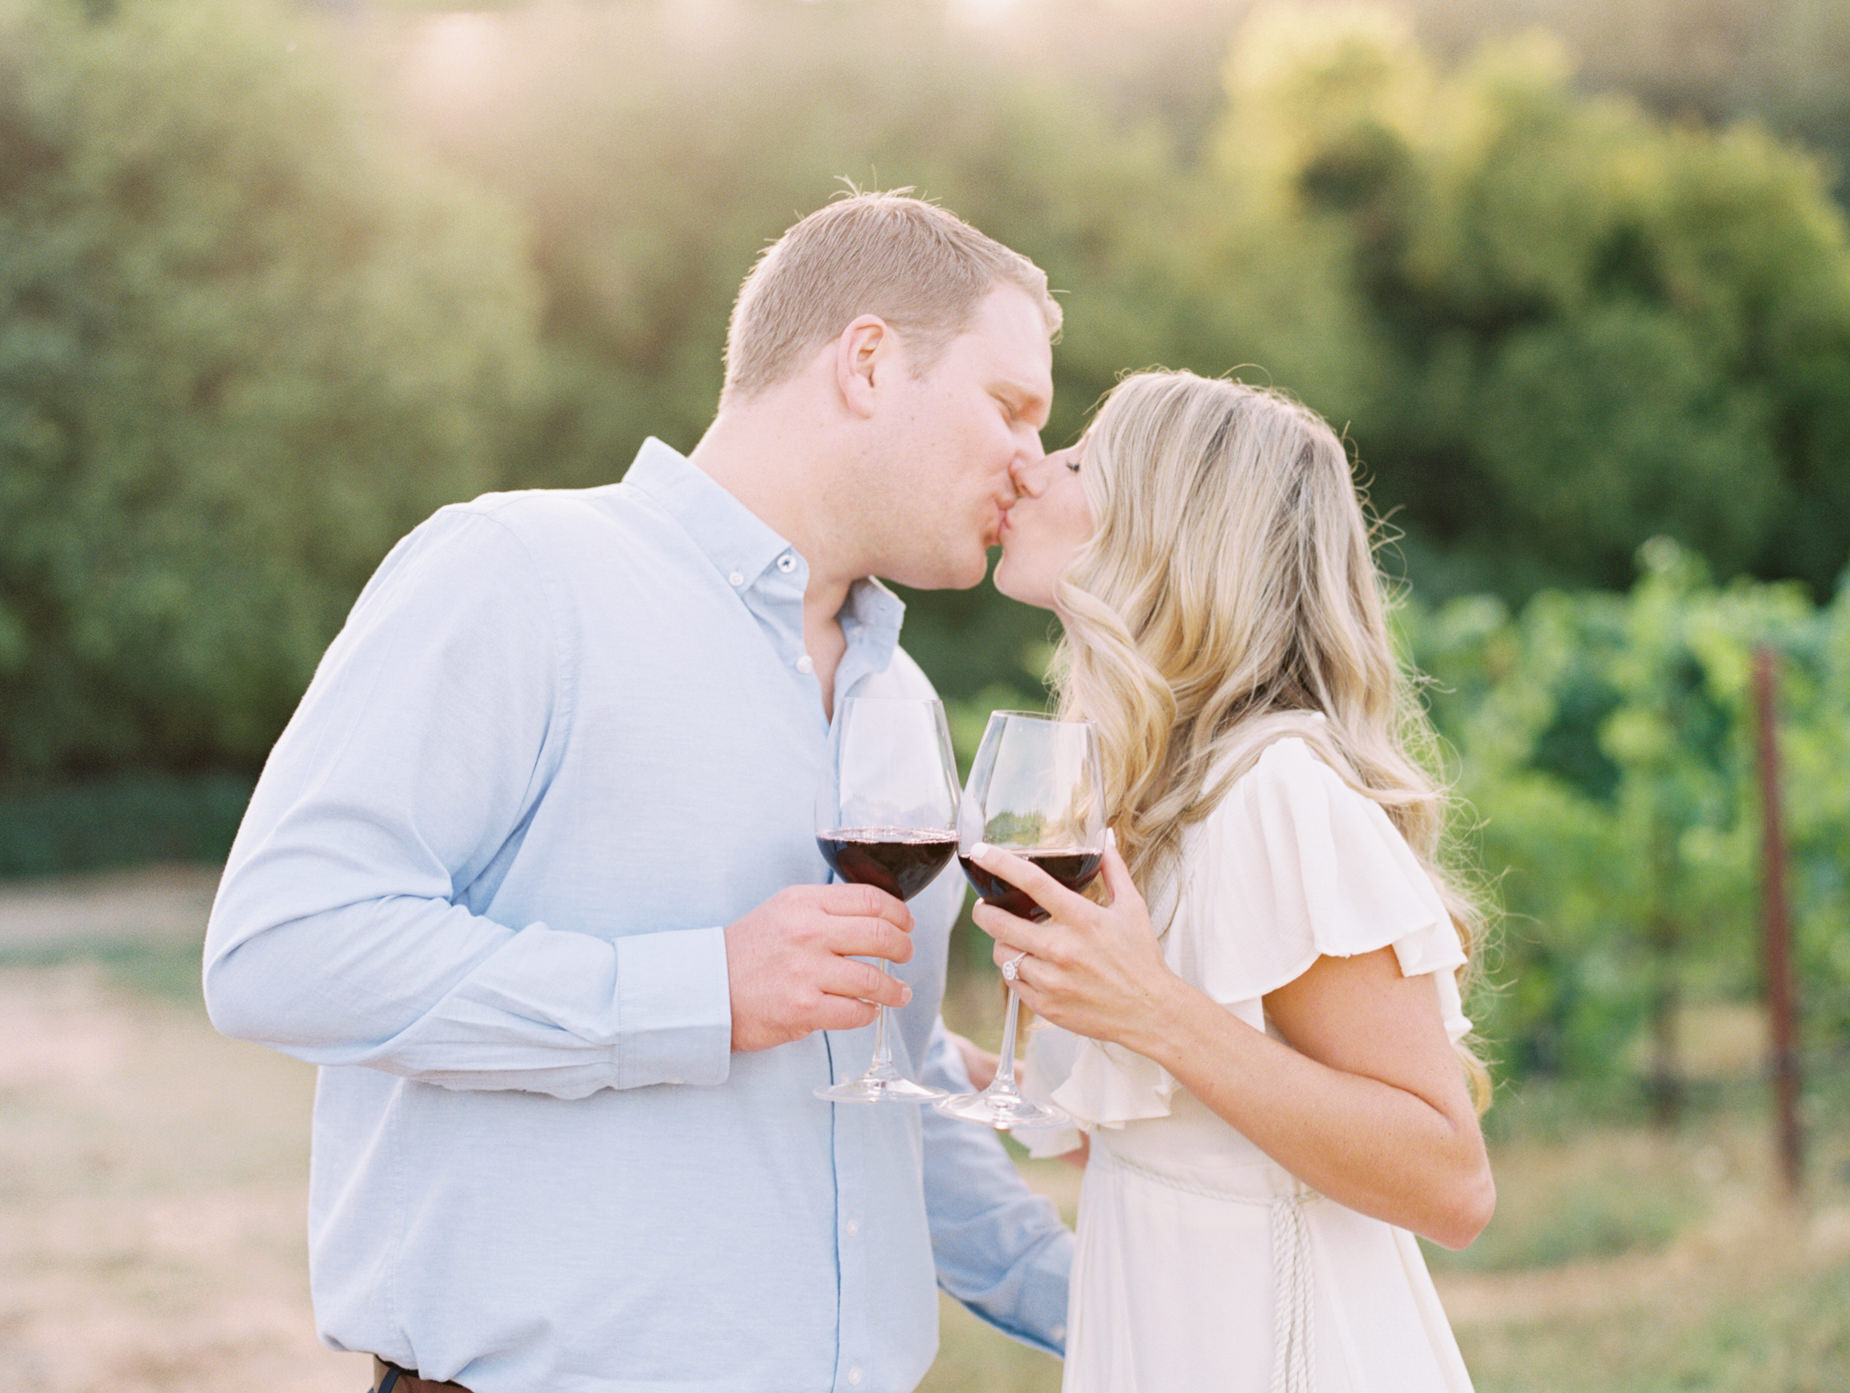 Jeff and Heather kiss while holding wine glasses at vineyard engagement at Williams Selyem Wines